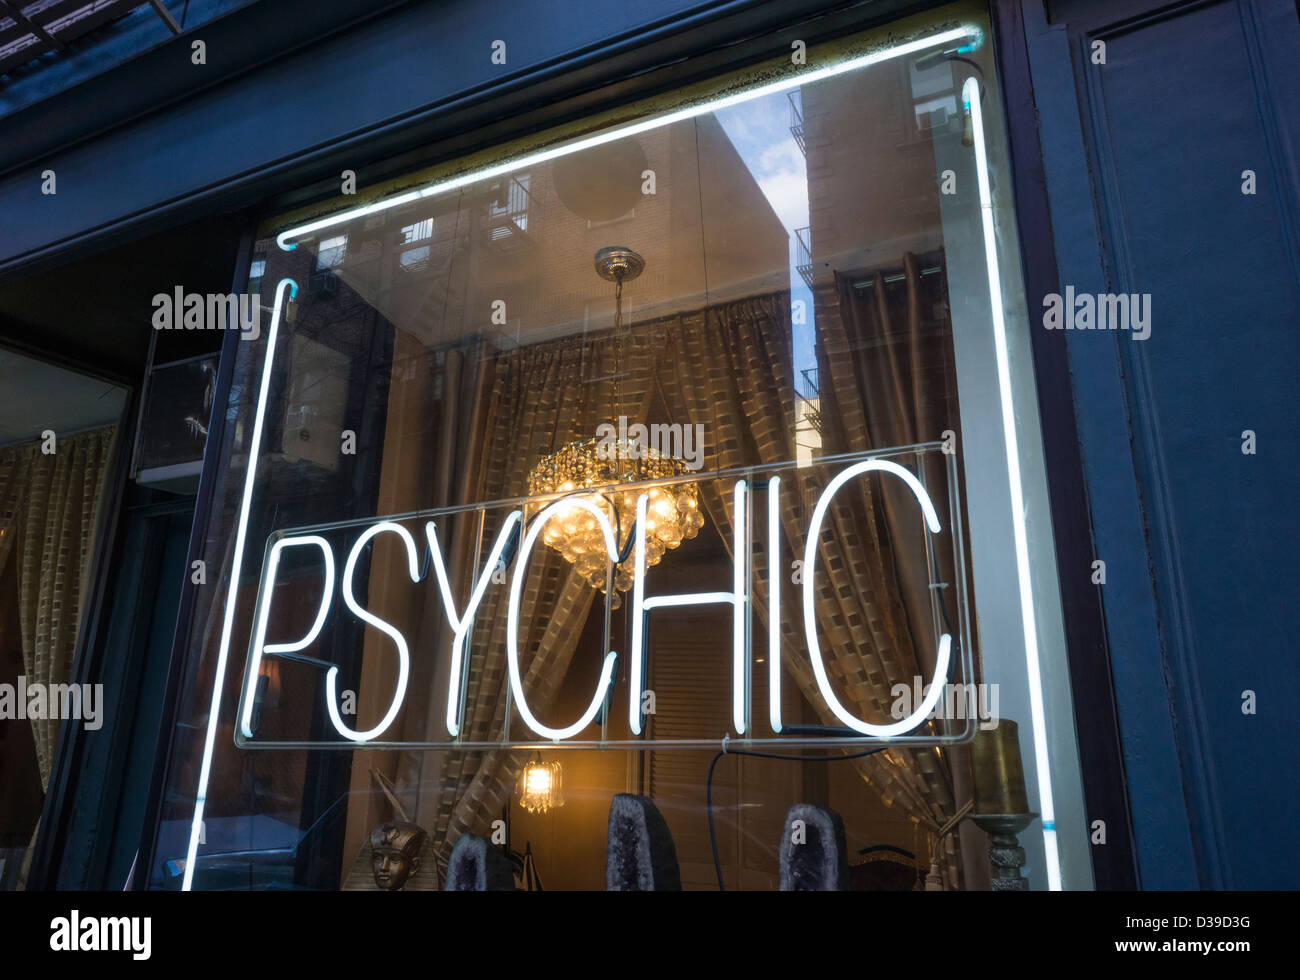 Psychic readings offered at a shop in Chinatown in New York City Stock Photo